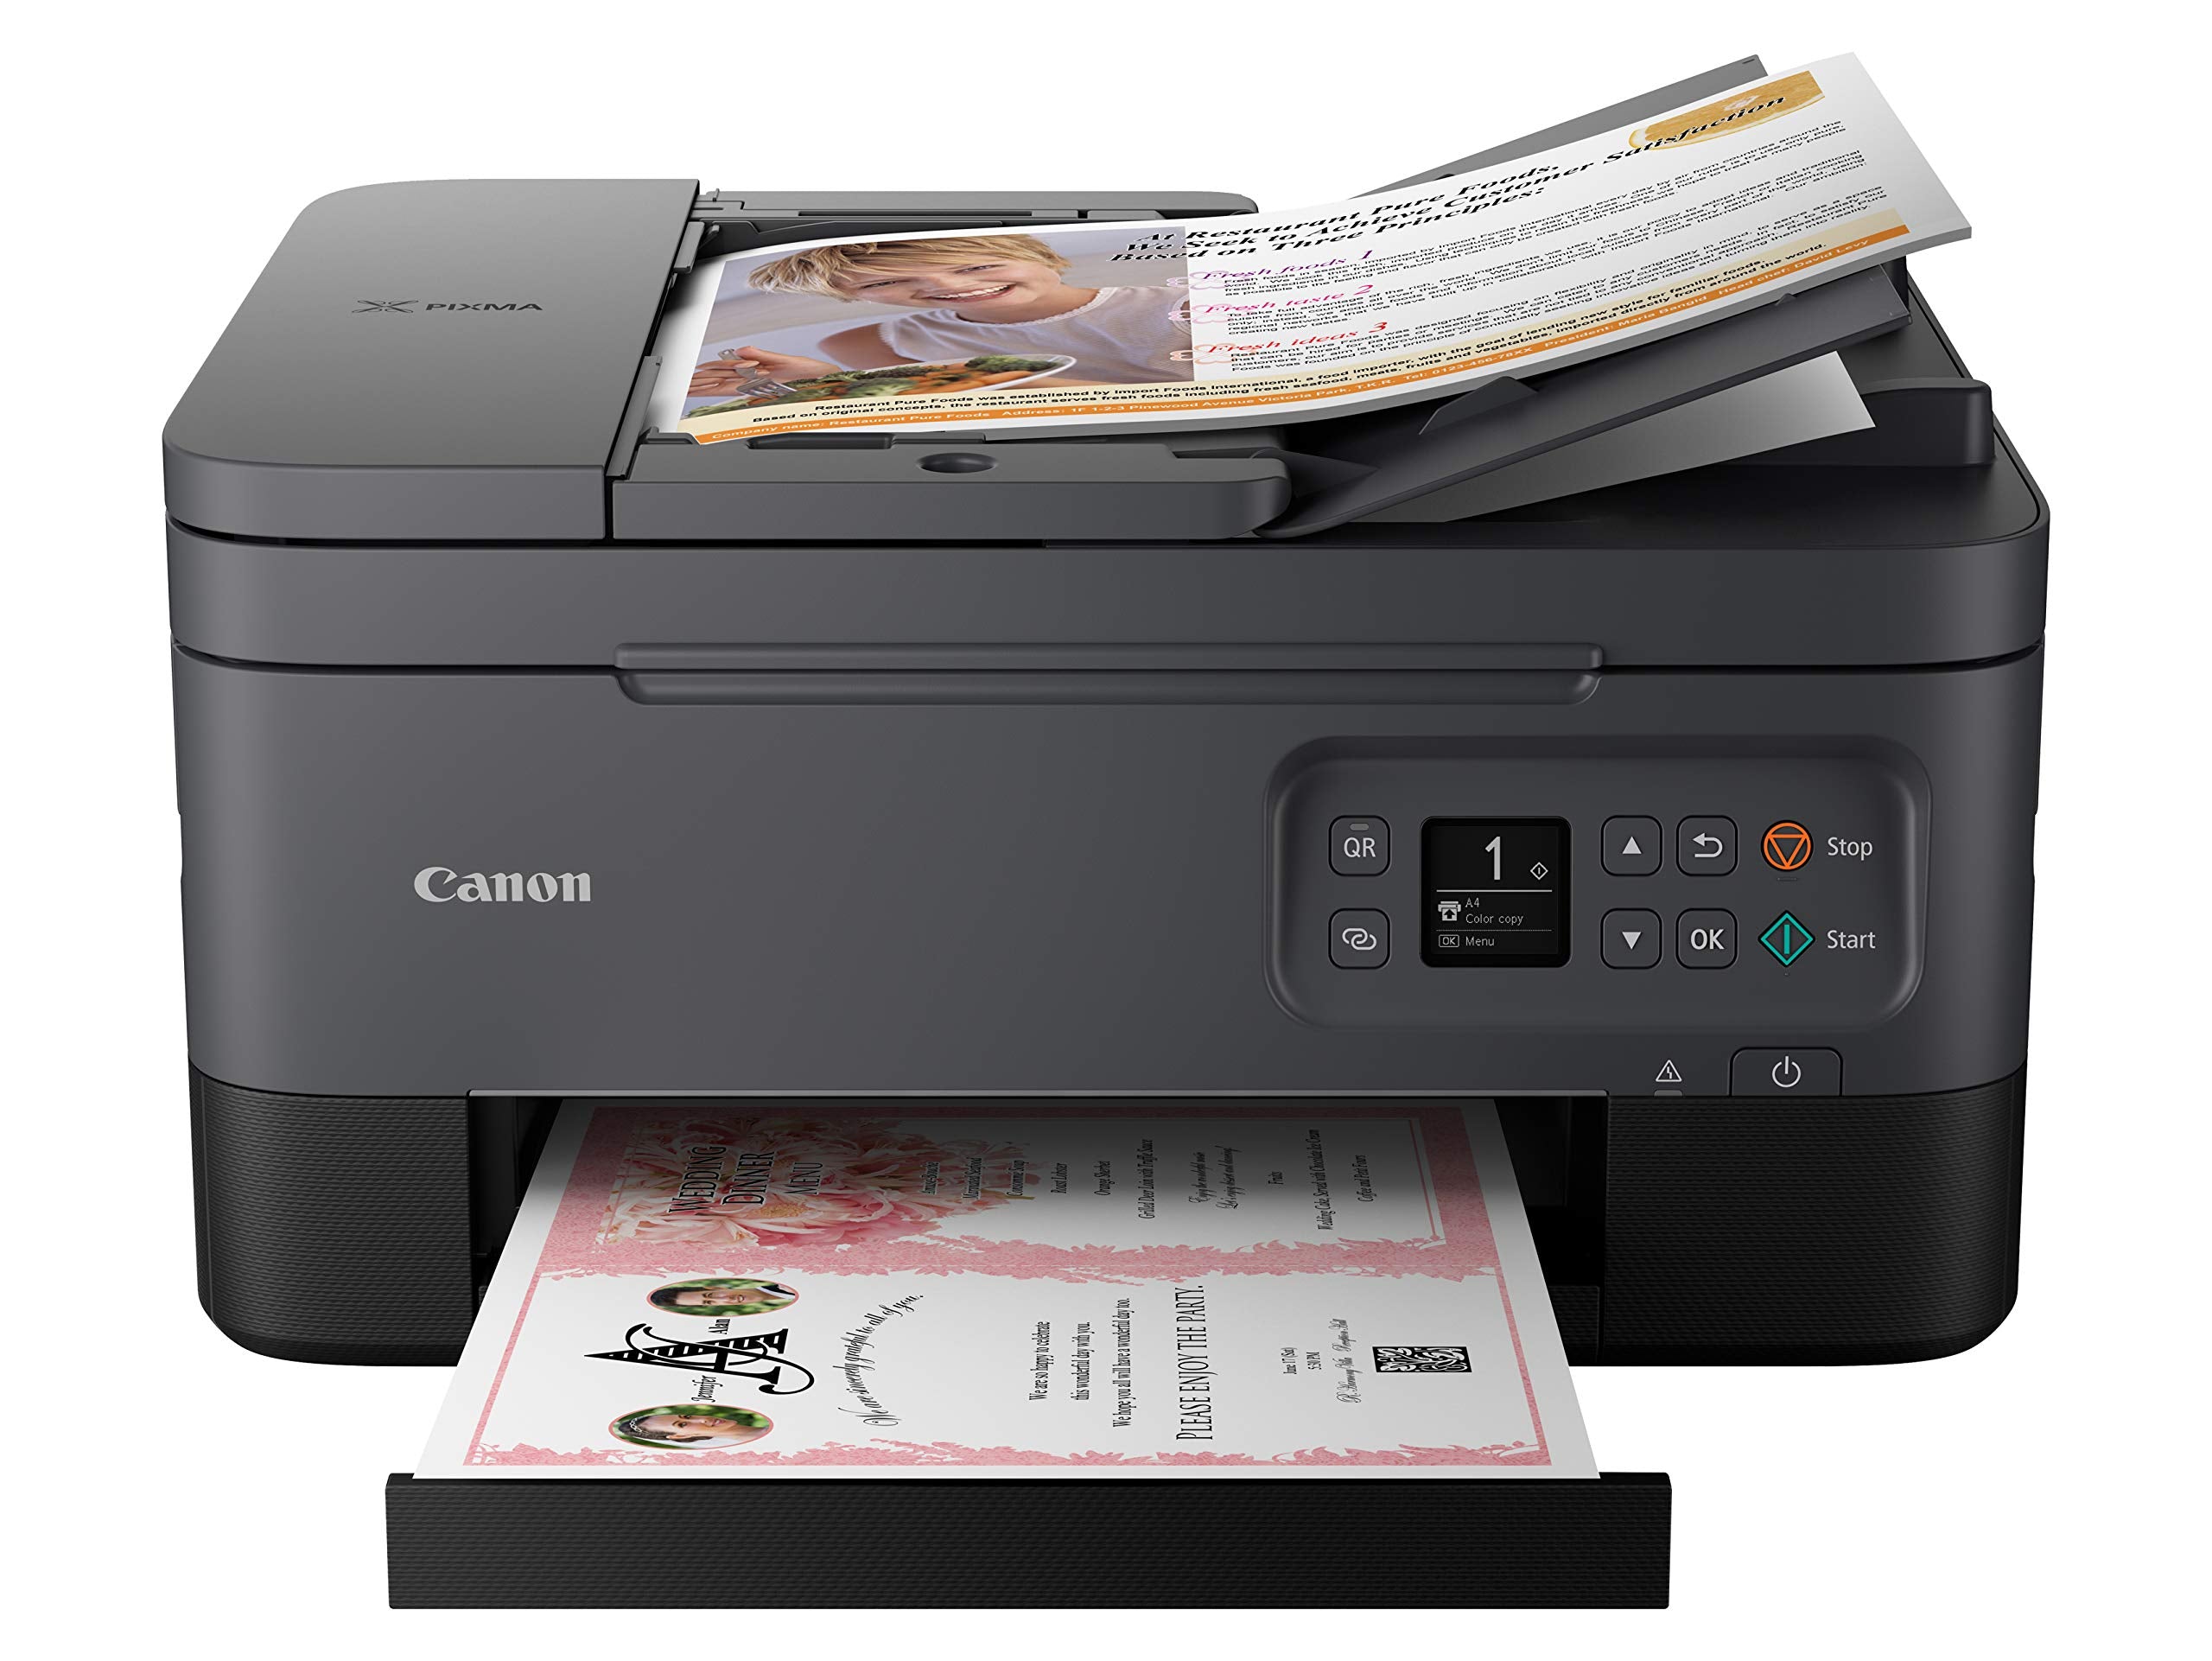 Canon TR7020 All-in-One Wireless Printer for Home Use,Black, Compact (4460C002)  - Like New